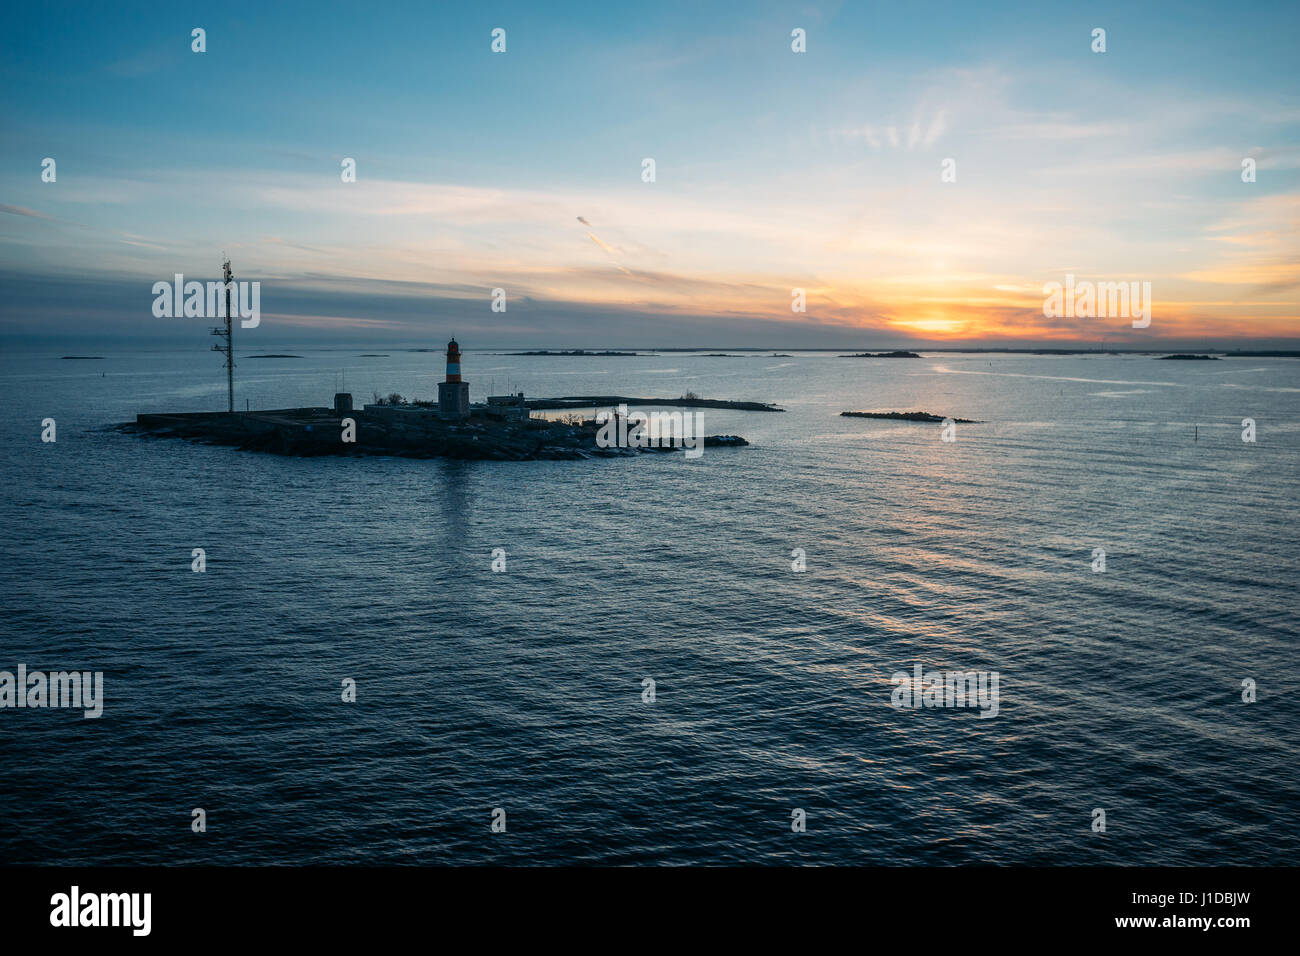 Small island with lighthouse and communication tower against scenic sunset Stock Photo